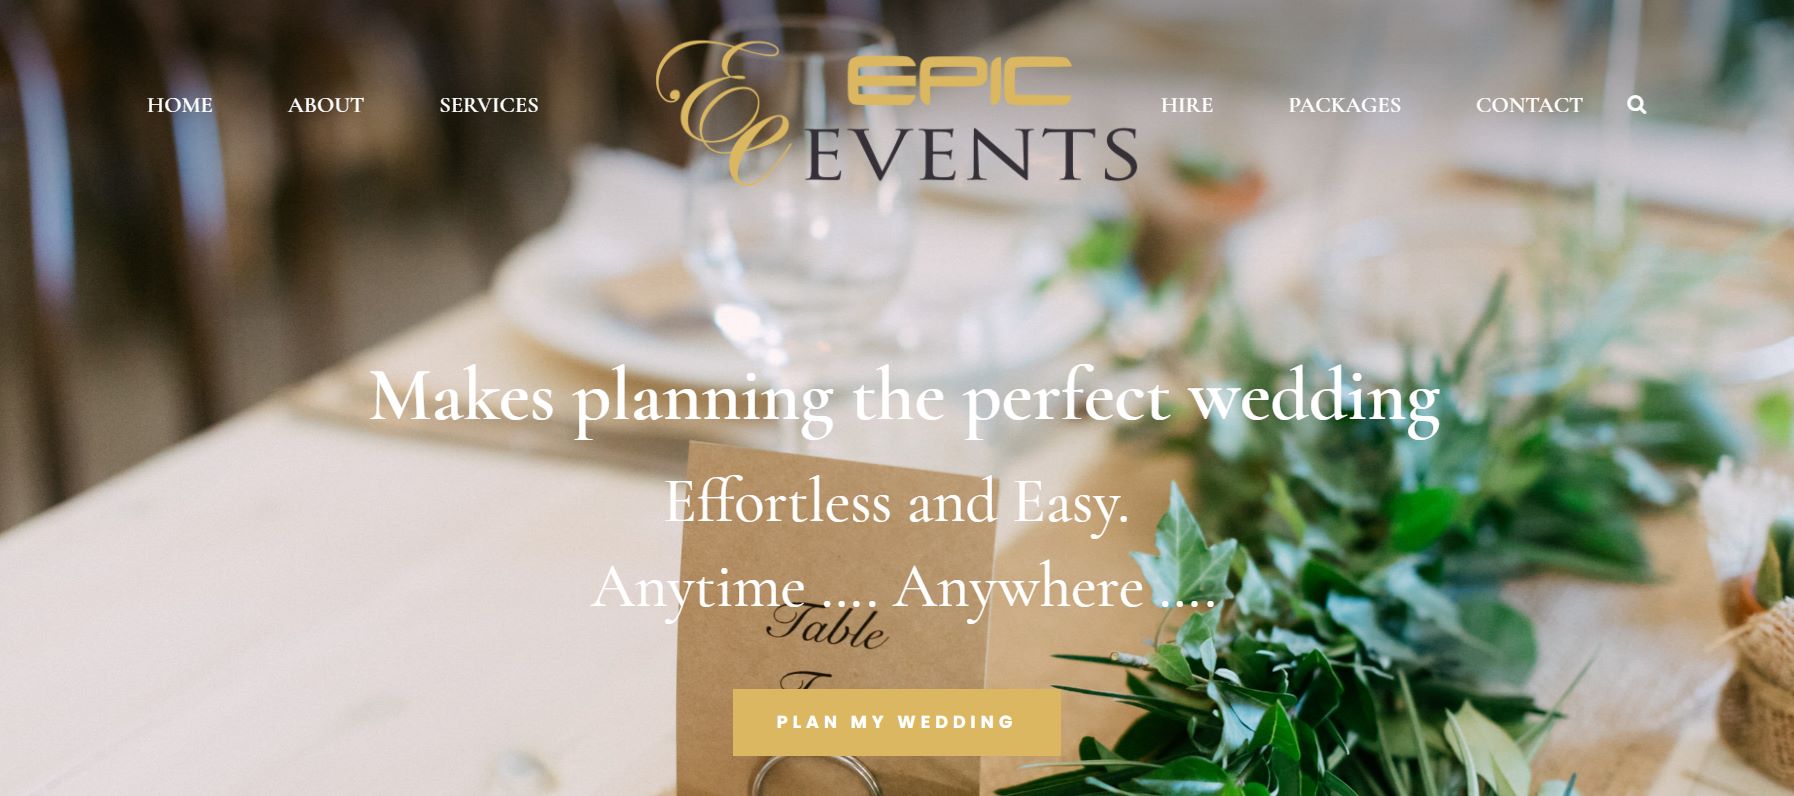 Epic Events Wedding Planners Adelaide